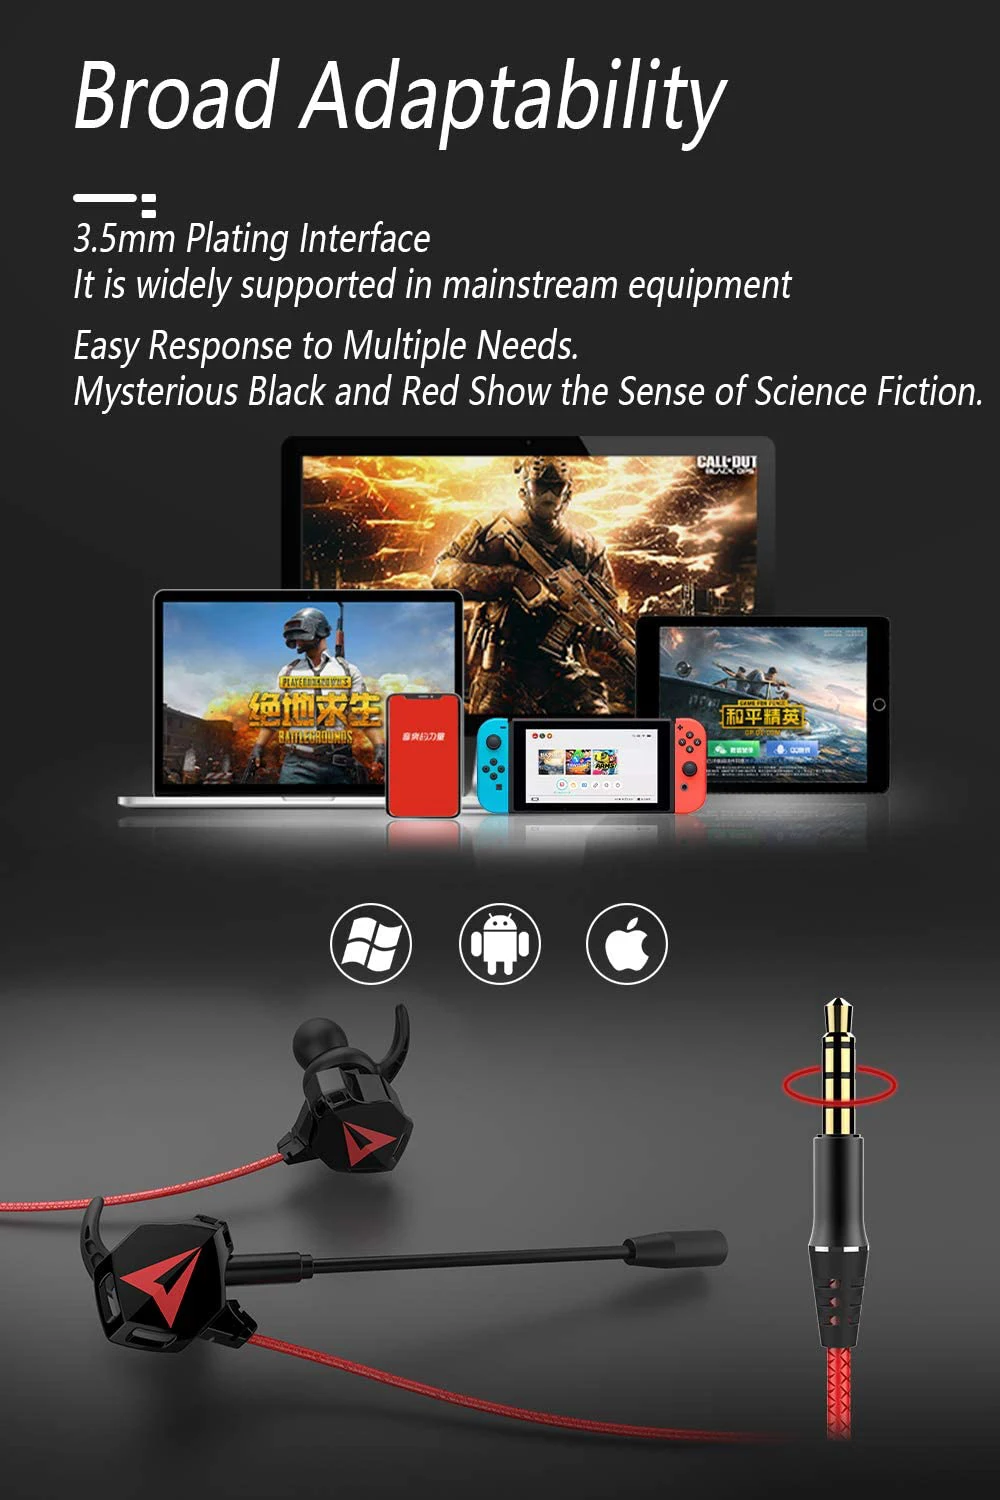 G901 Factory Directly Plextone Wired PC Gaming Headset Earphone with Detachable Long Microphone